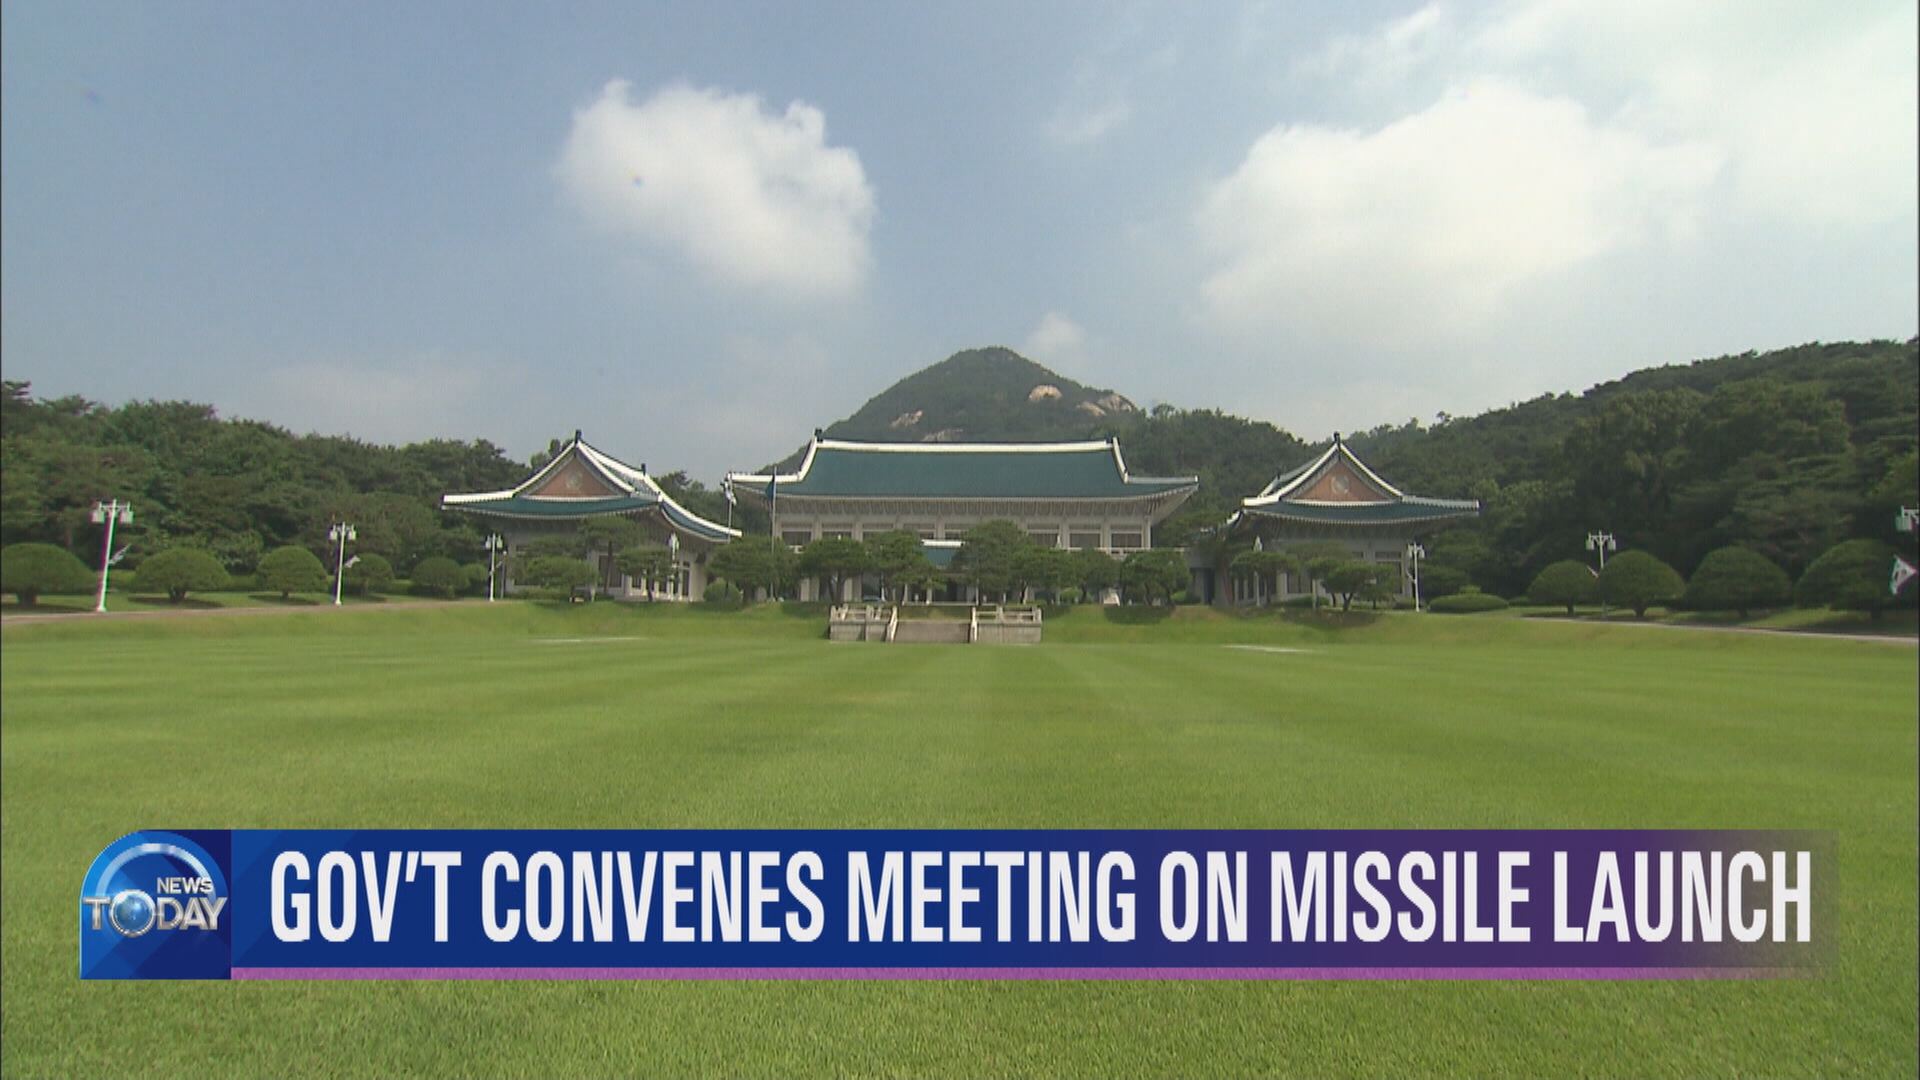 GOV’T CONVENES MEETING ON MISSILE LAUNCH